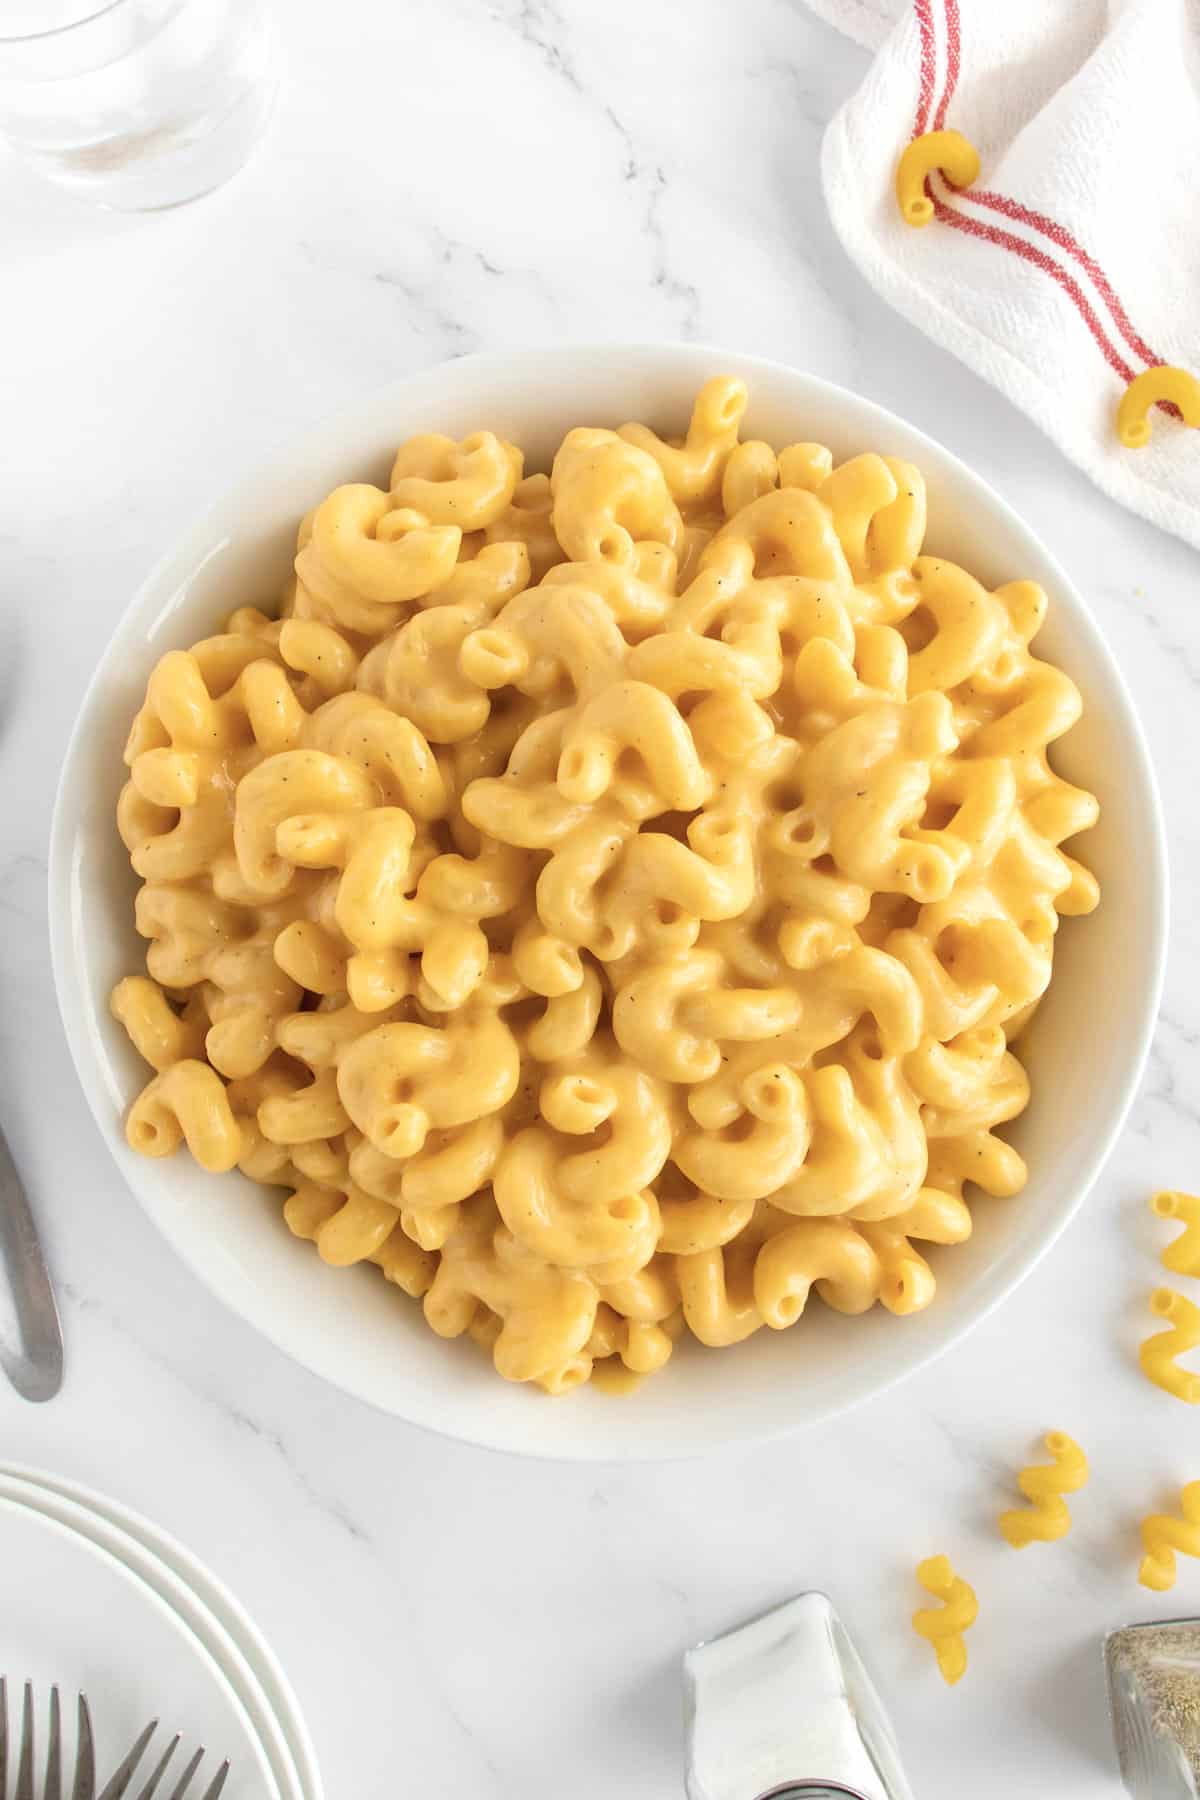 A large white bowl filled with macaroni and cheese.